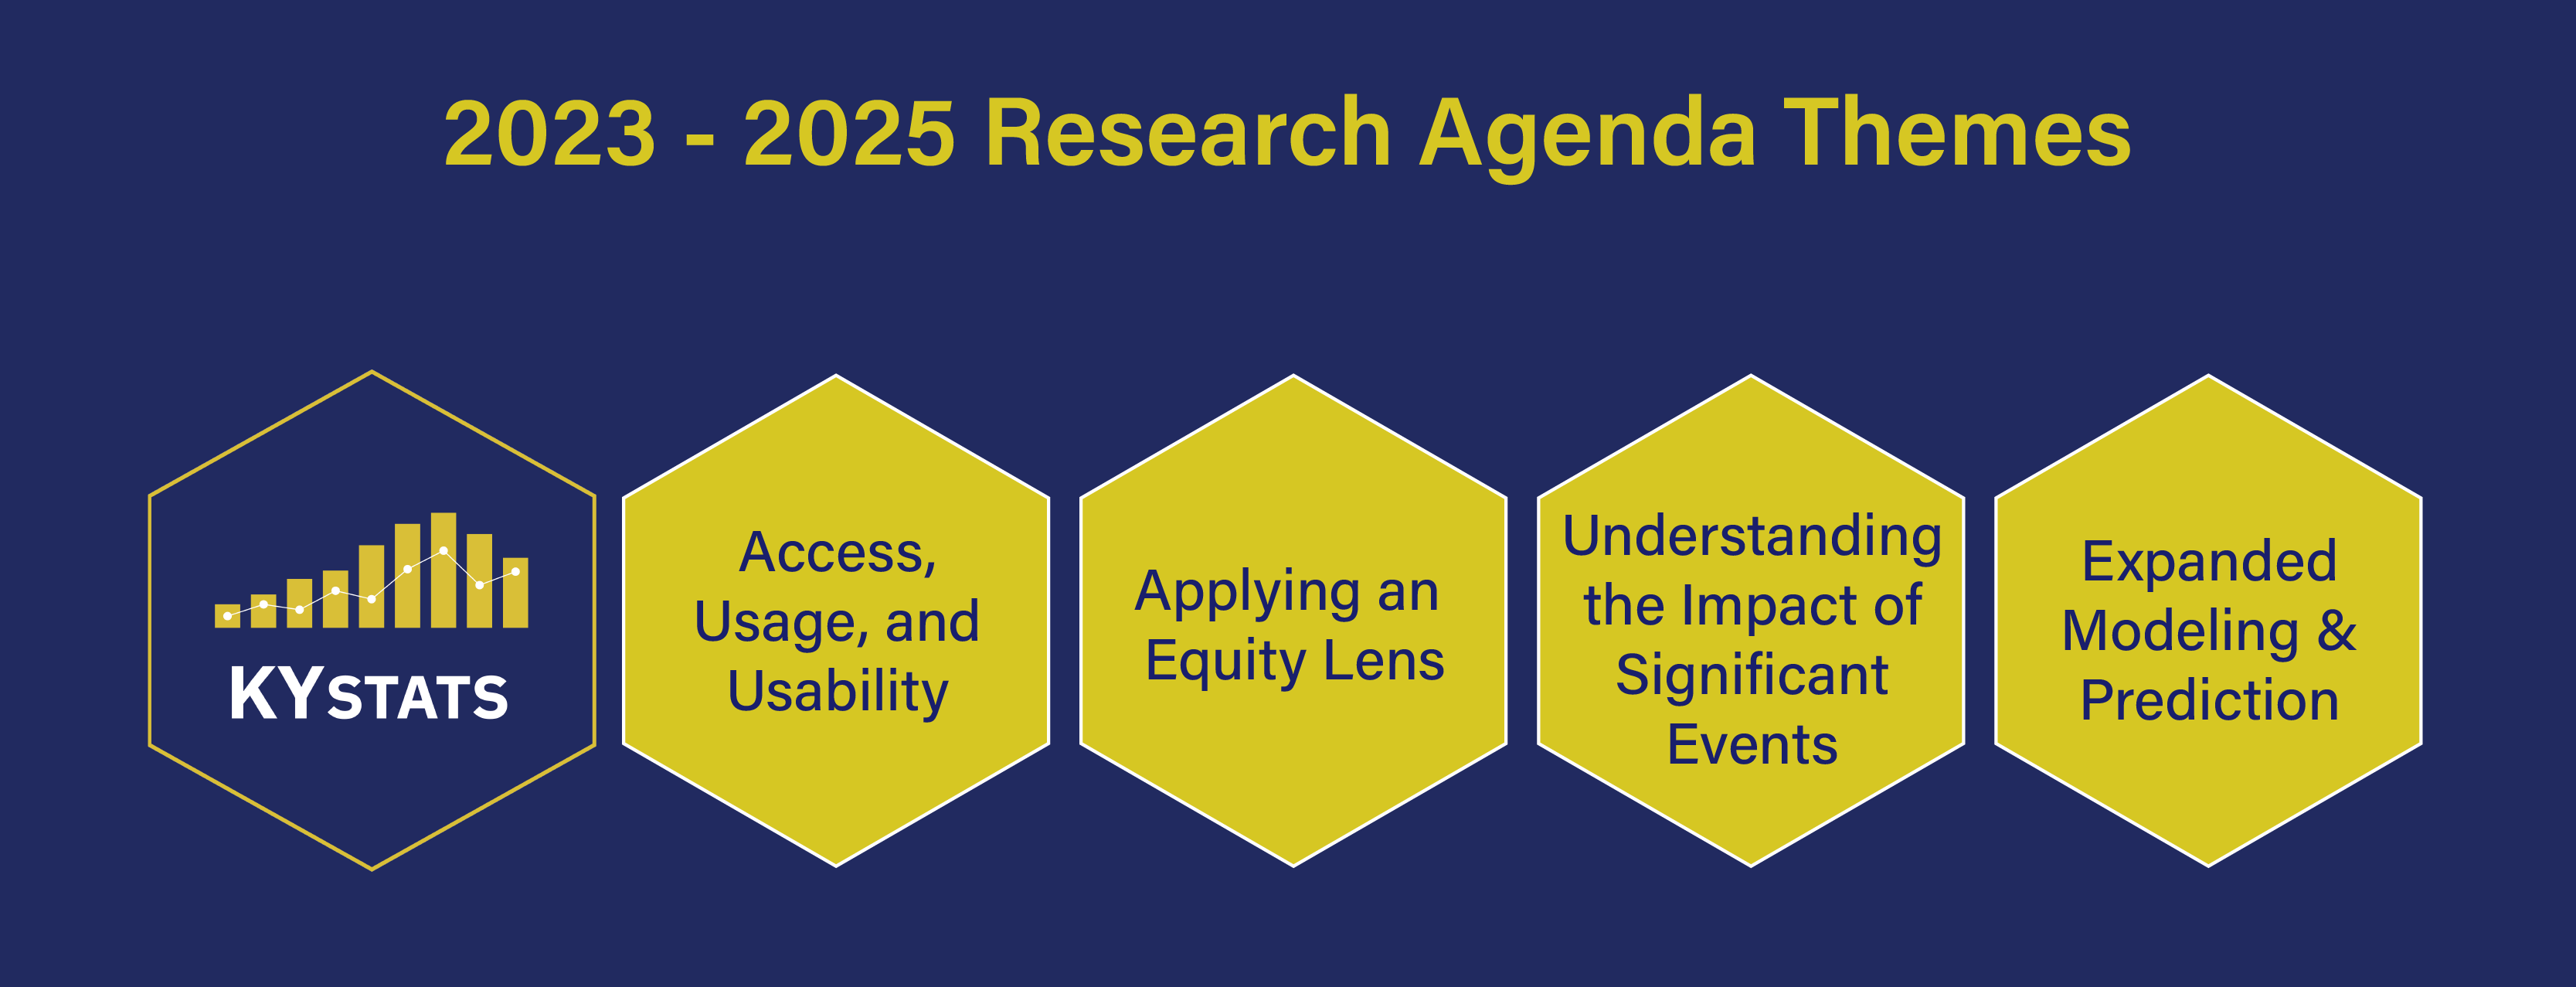 KYSTATS Research agenda themes: 1) Access, Usage, & Usability; 2) Applying an Equity Lens; 3) Understanding the Impact of Significant Events; 4) Expanding Modeling & Prediction